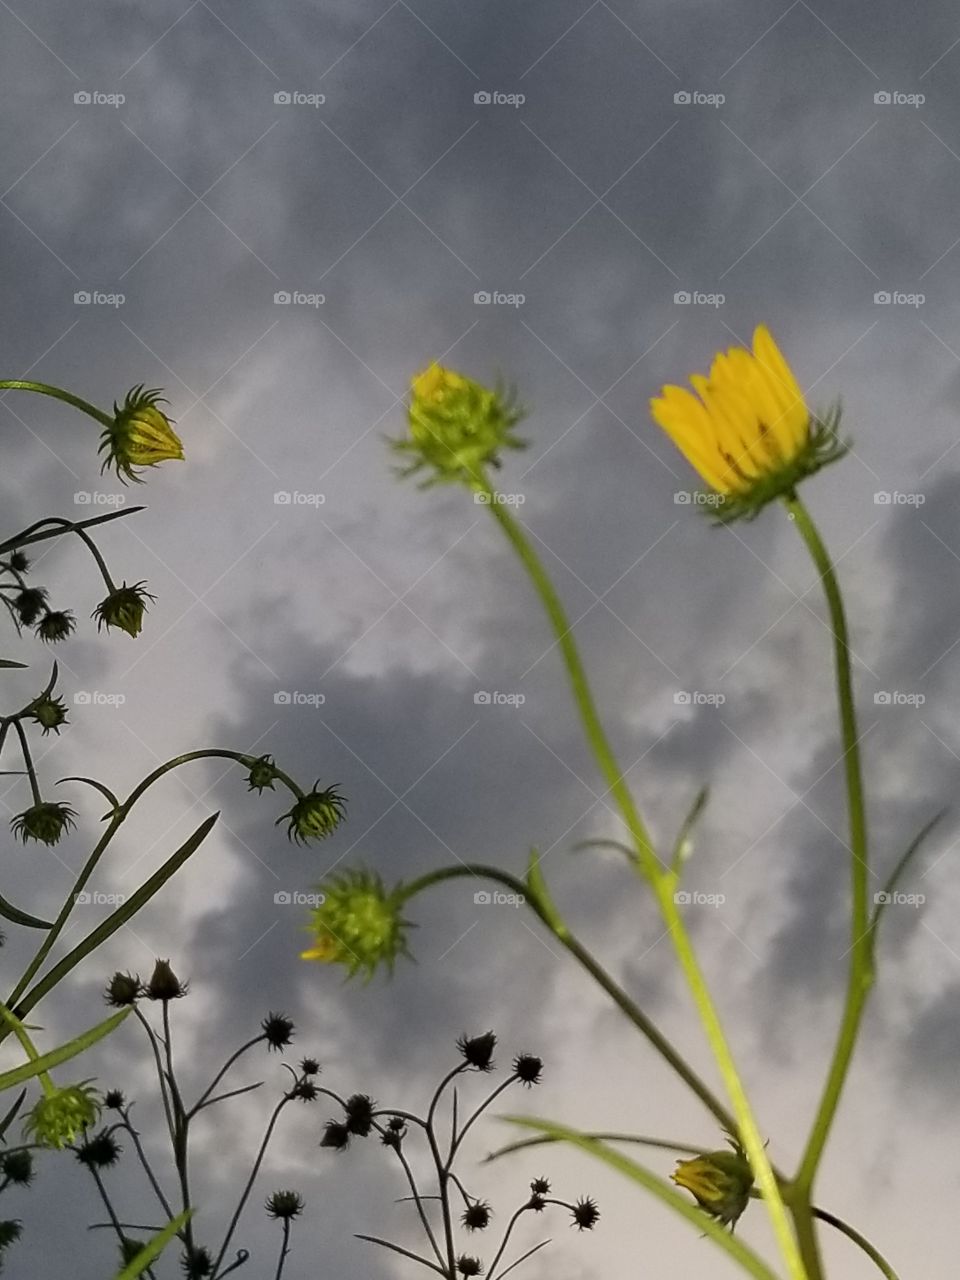 Daisys in the sky